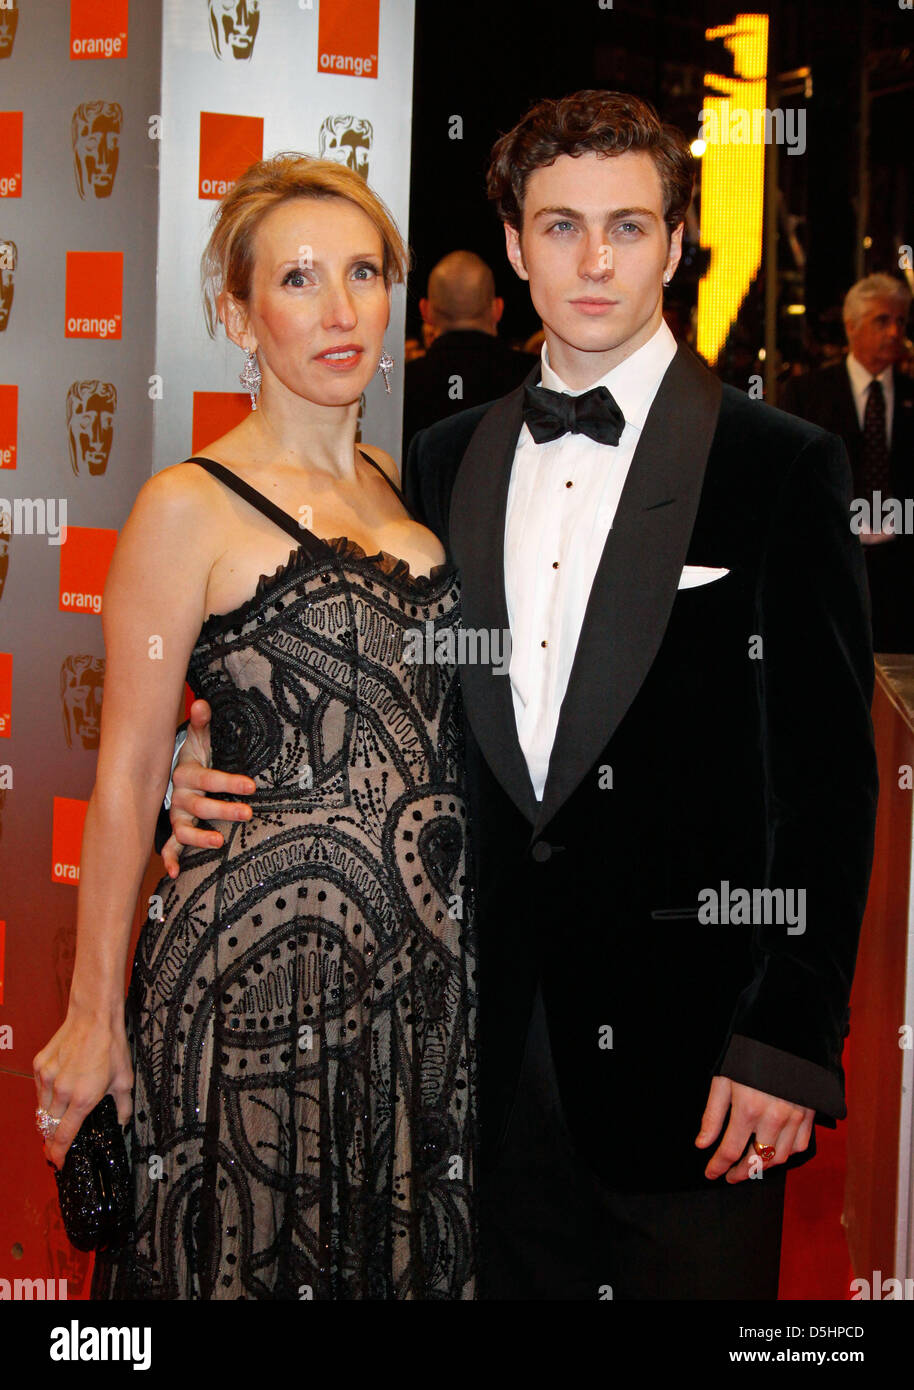 British director Sam Taylor Wood (L) and British actor Aaron Johnson arrive for the 2010 Orange British Academy Film Awards (BAFTA) held at the Royal Opera House in London, Great Britain, 21 February 2010. The BAFTAs are the biggest and most prestigious British film awards honouring British as well as international cinematic talent. Photo: Hubert Boesl Stock Photo